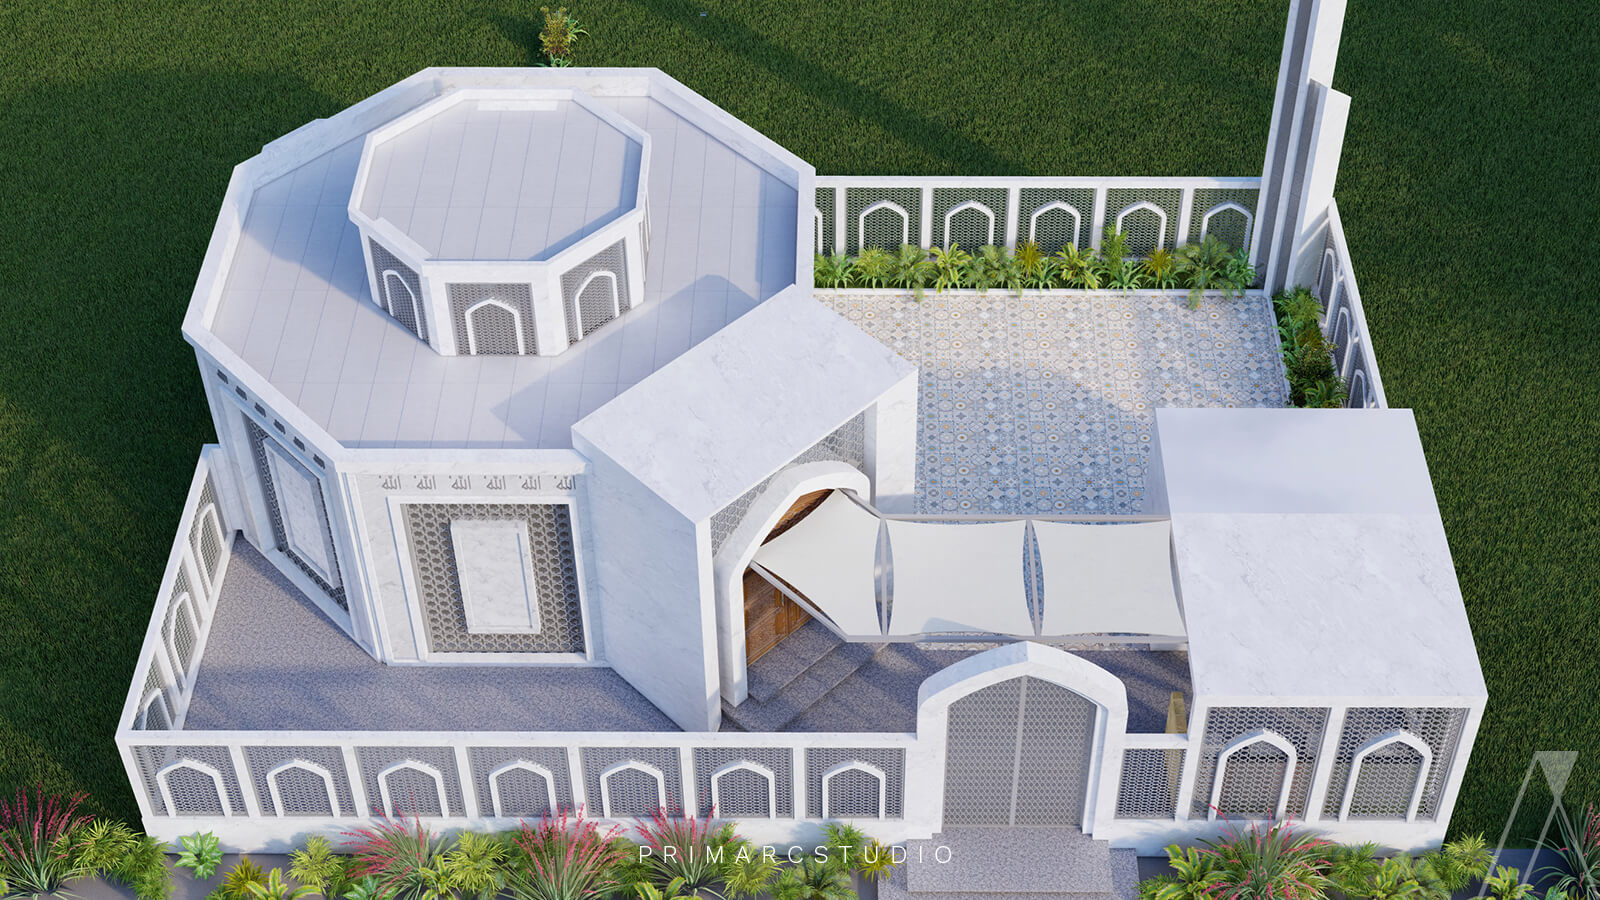 Small masjid design in white marble